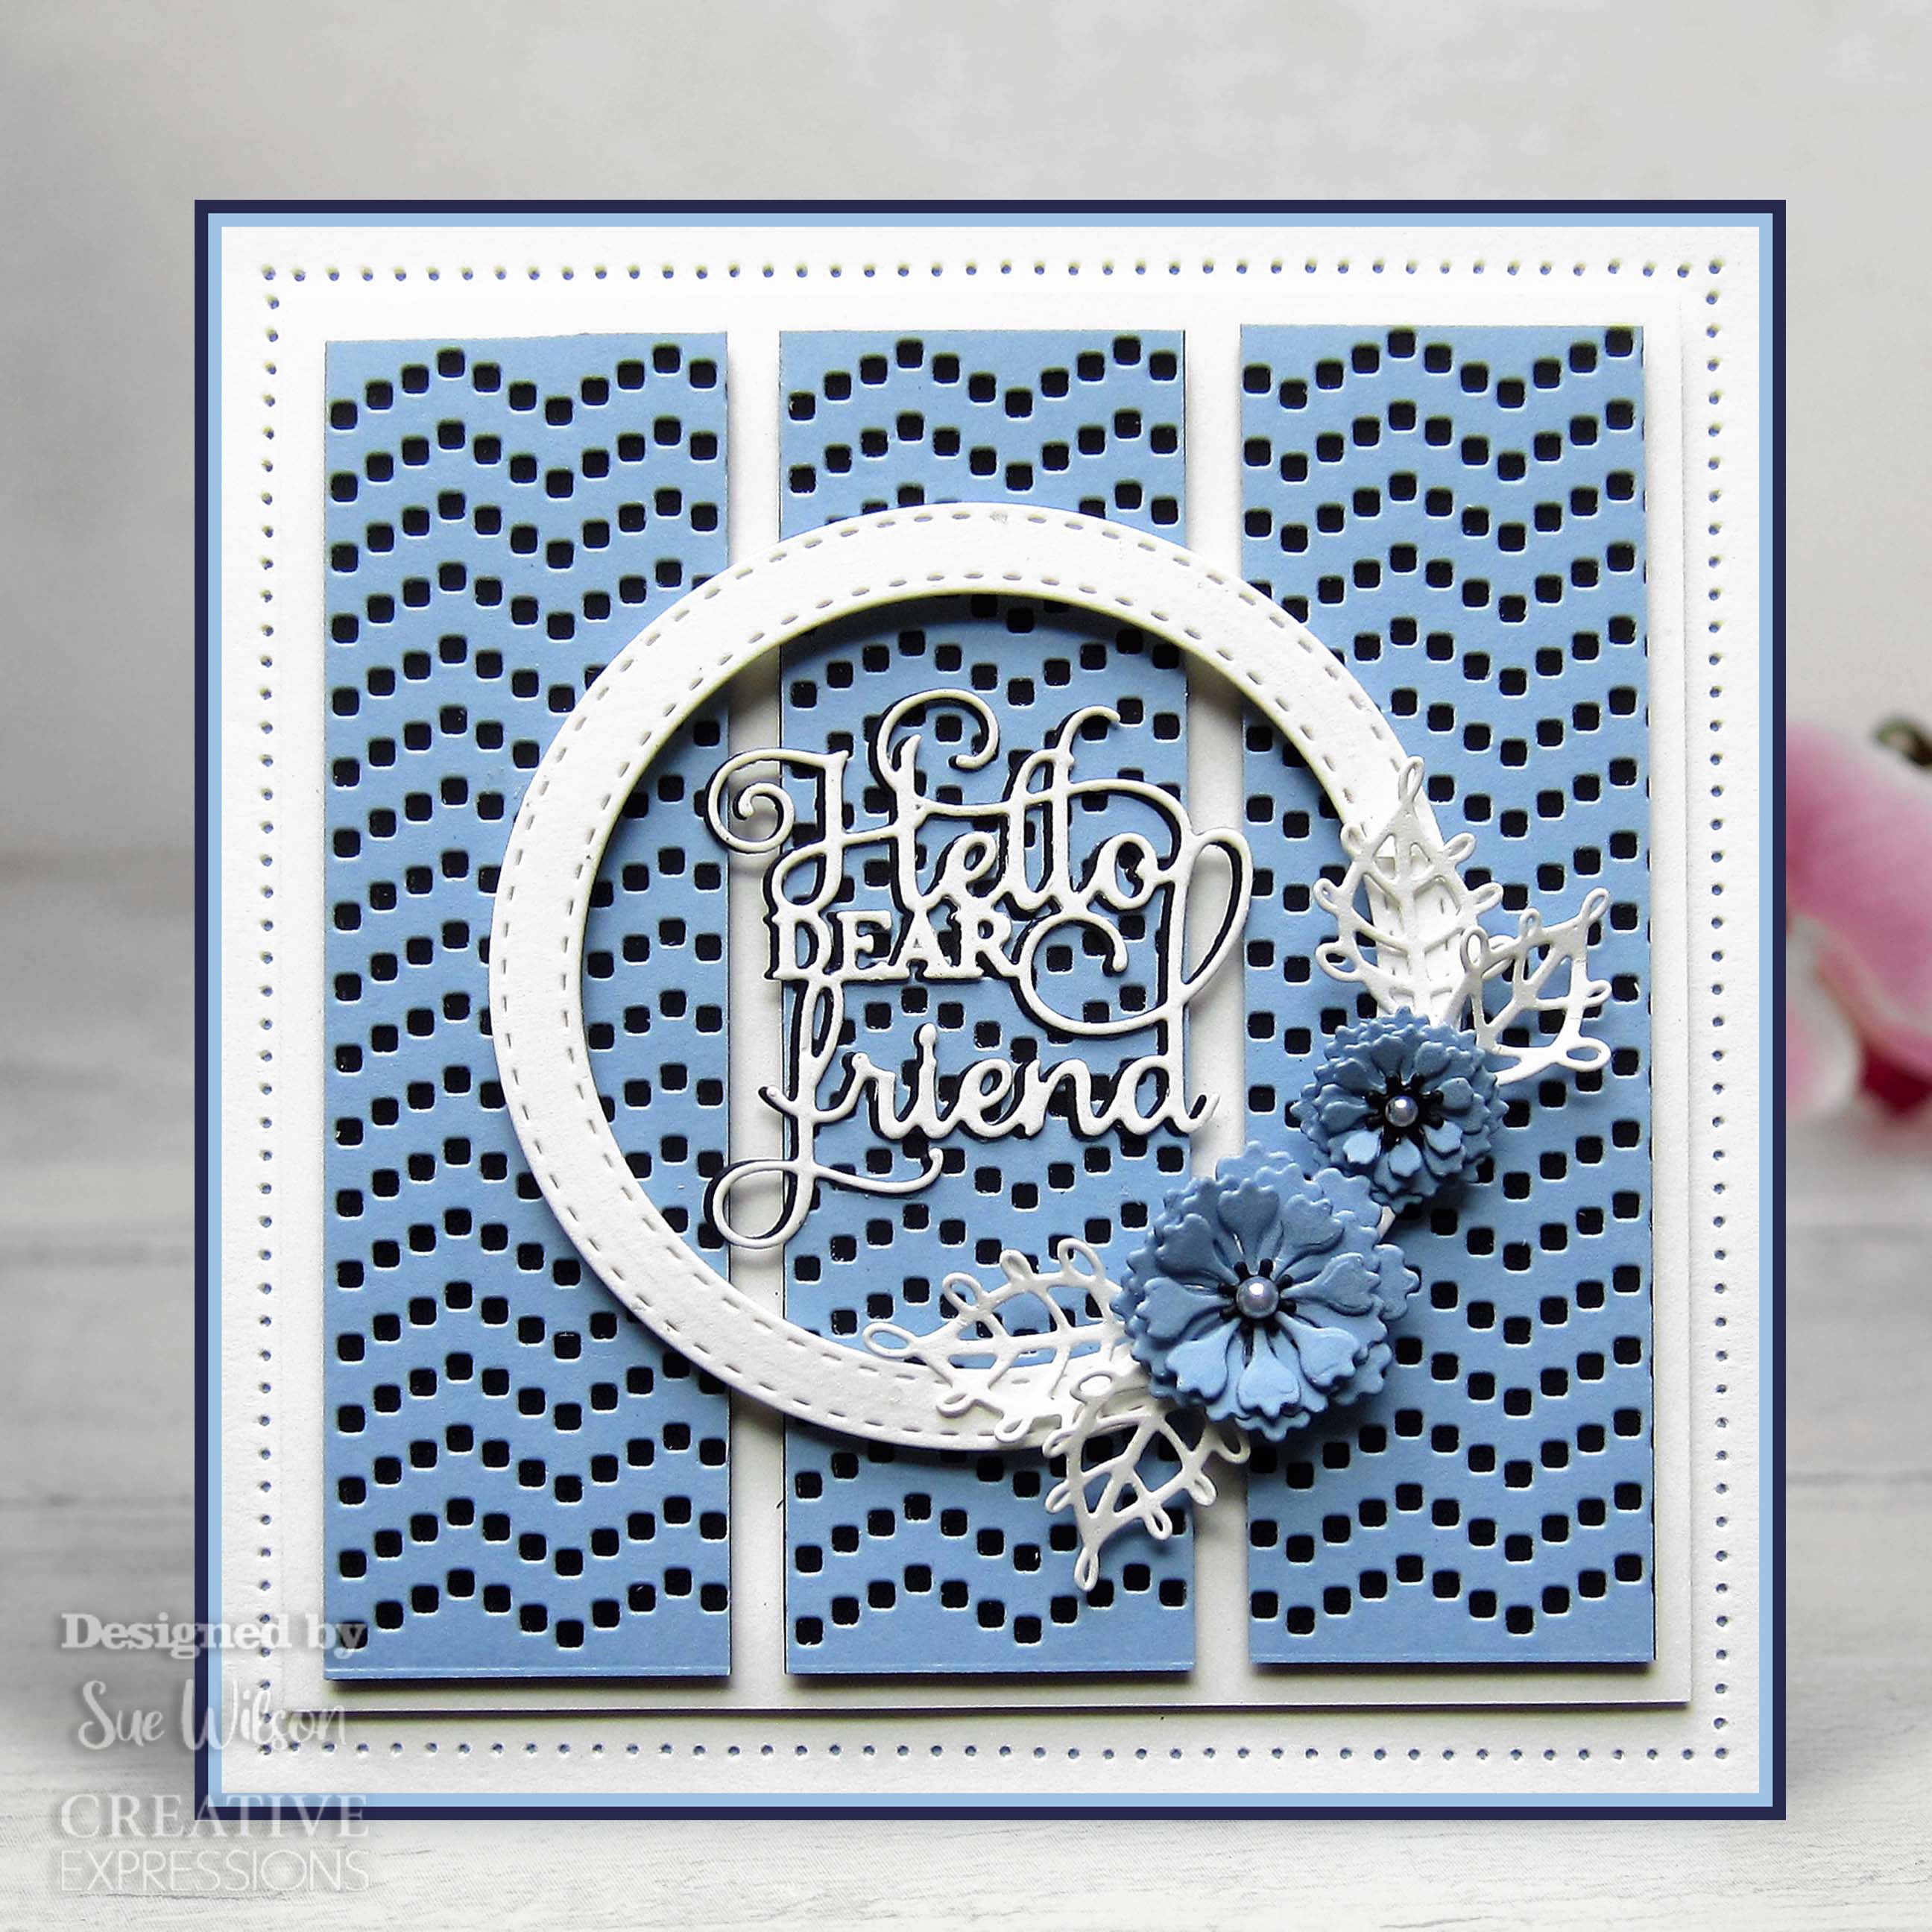 Creative Expressions Sue Wilson Background Collection Ric Rac Ribbon Craft Die